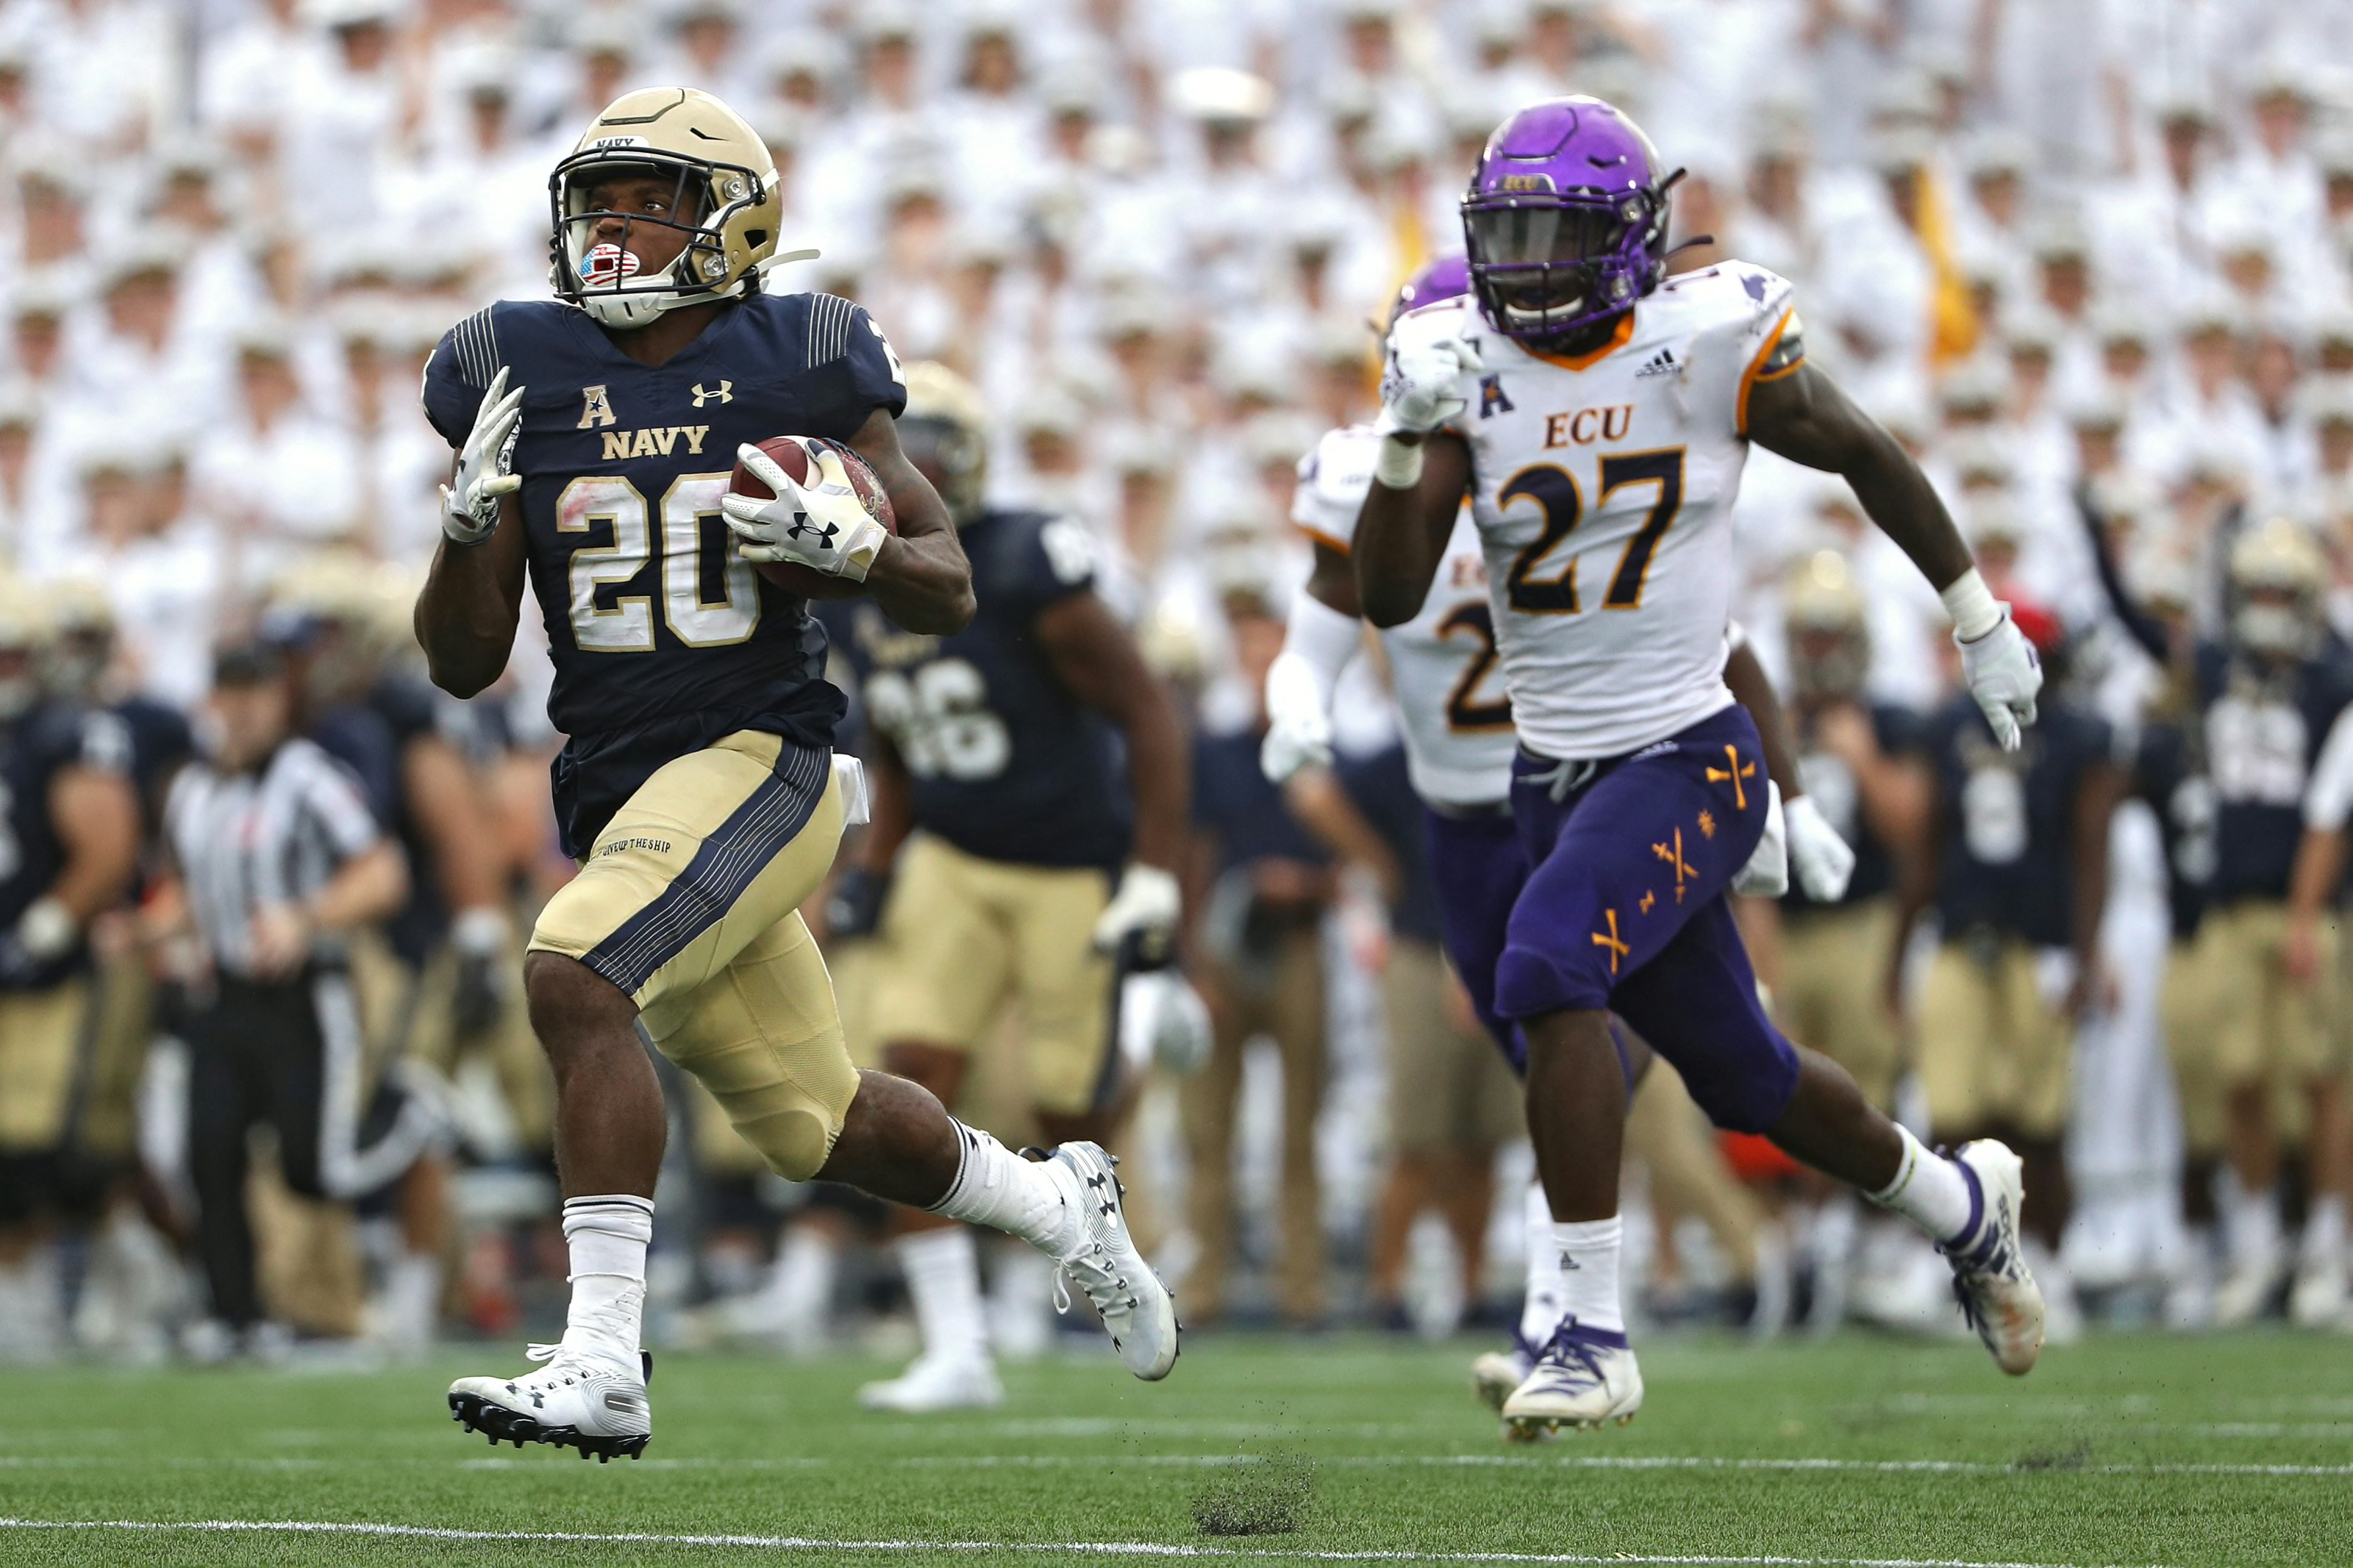 2020 ECU Football: Way-Too-Early Game Predictions - Page 4